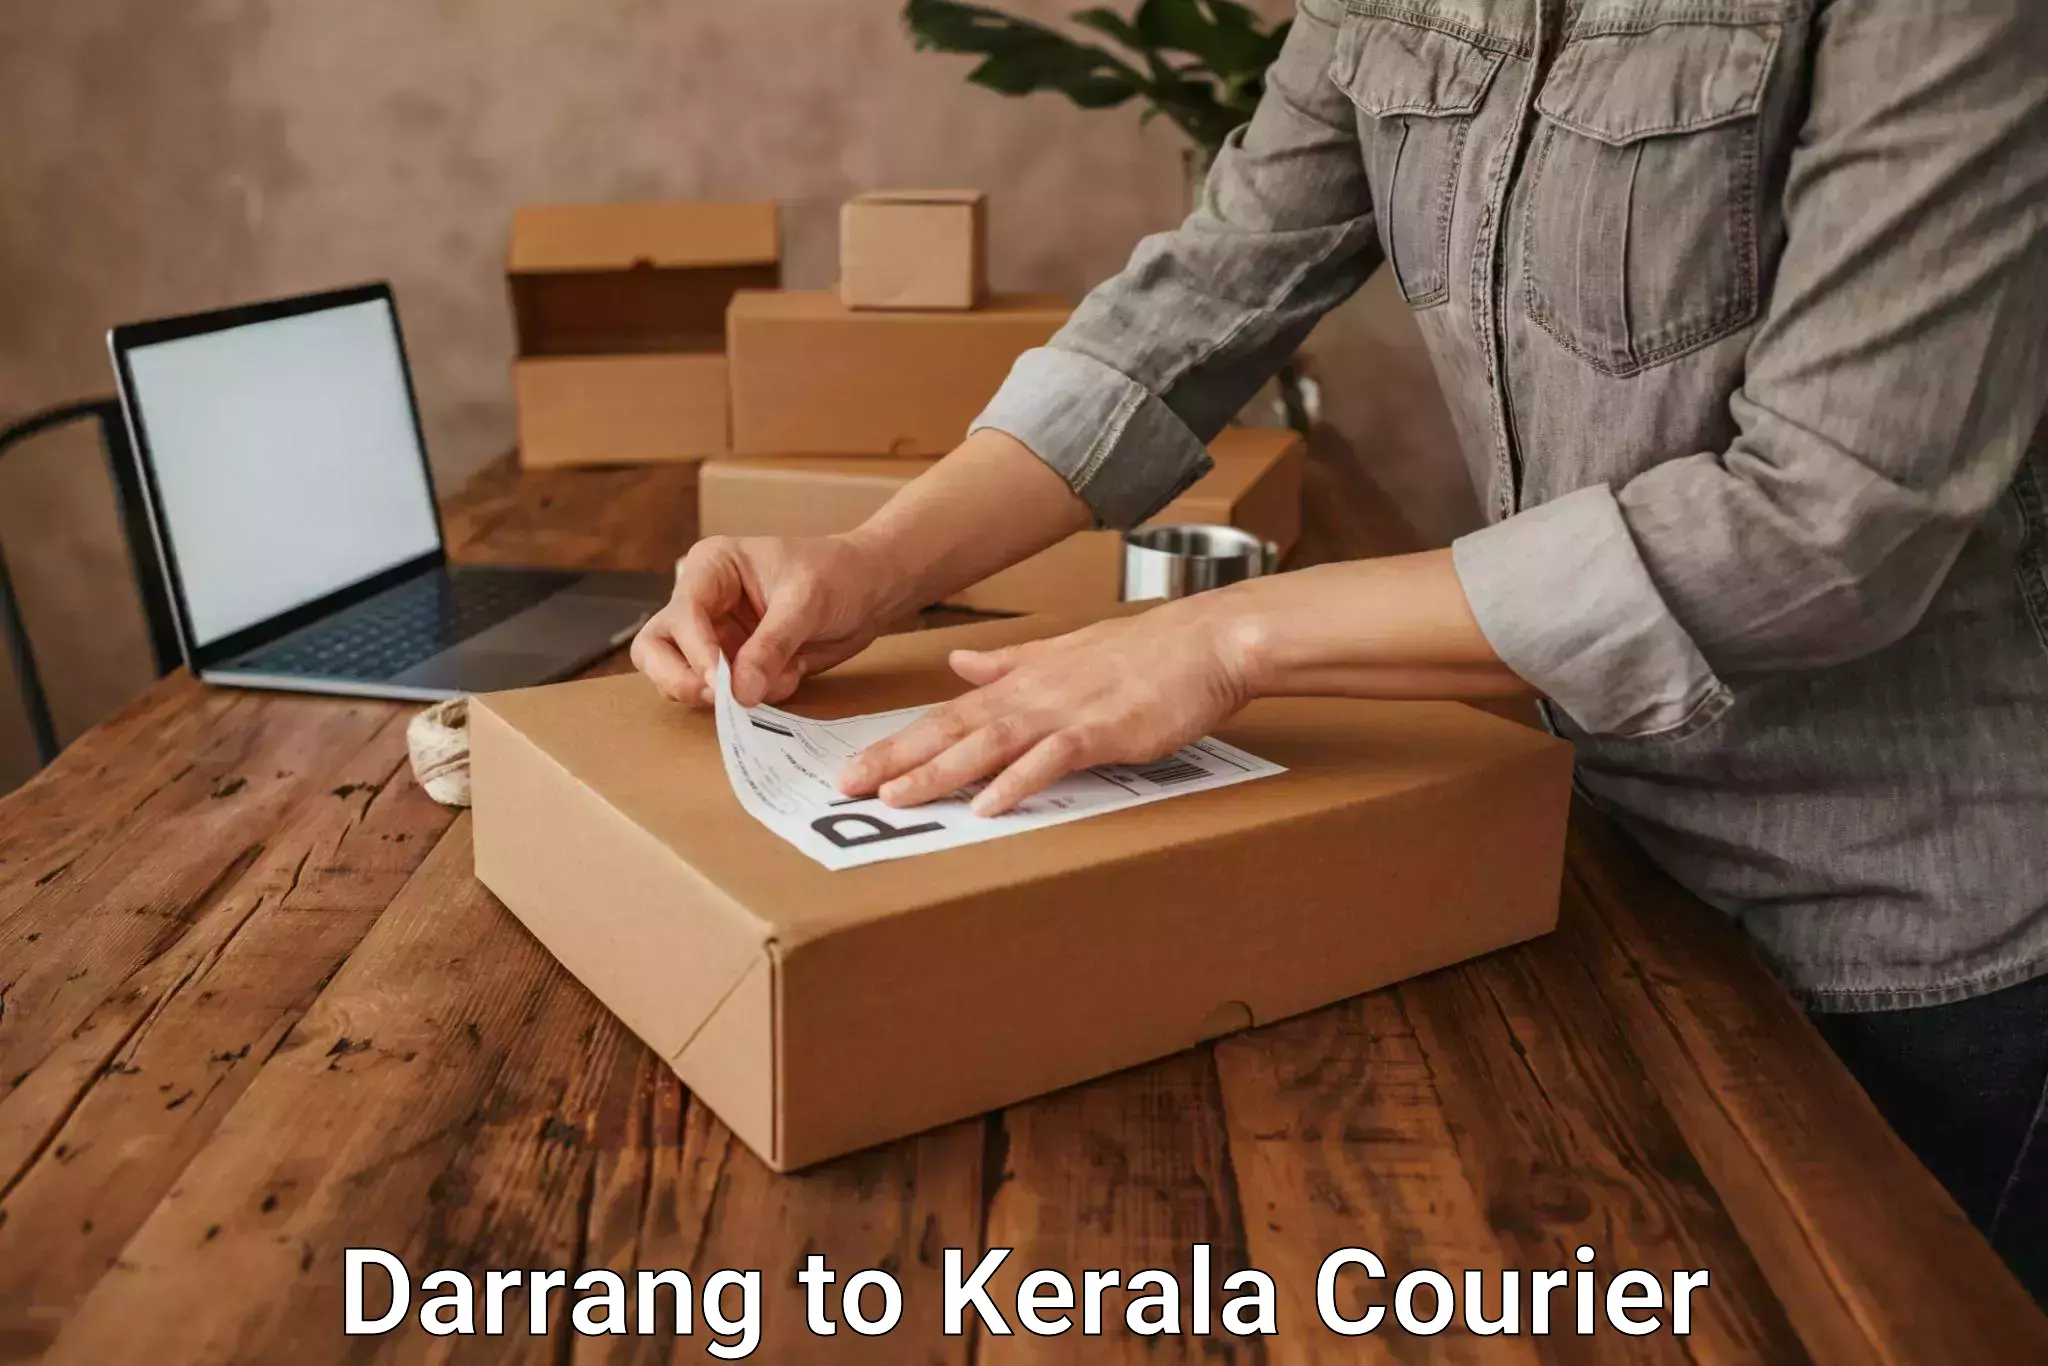 Advanced tracking systems Darrang to Chengannur